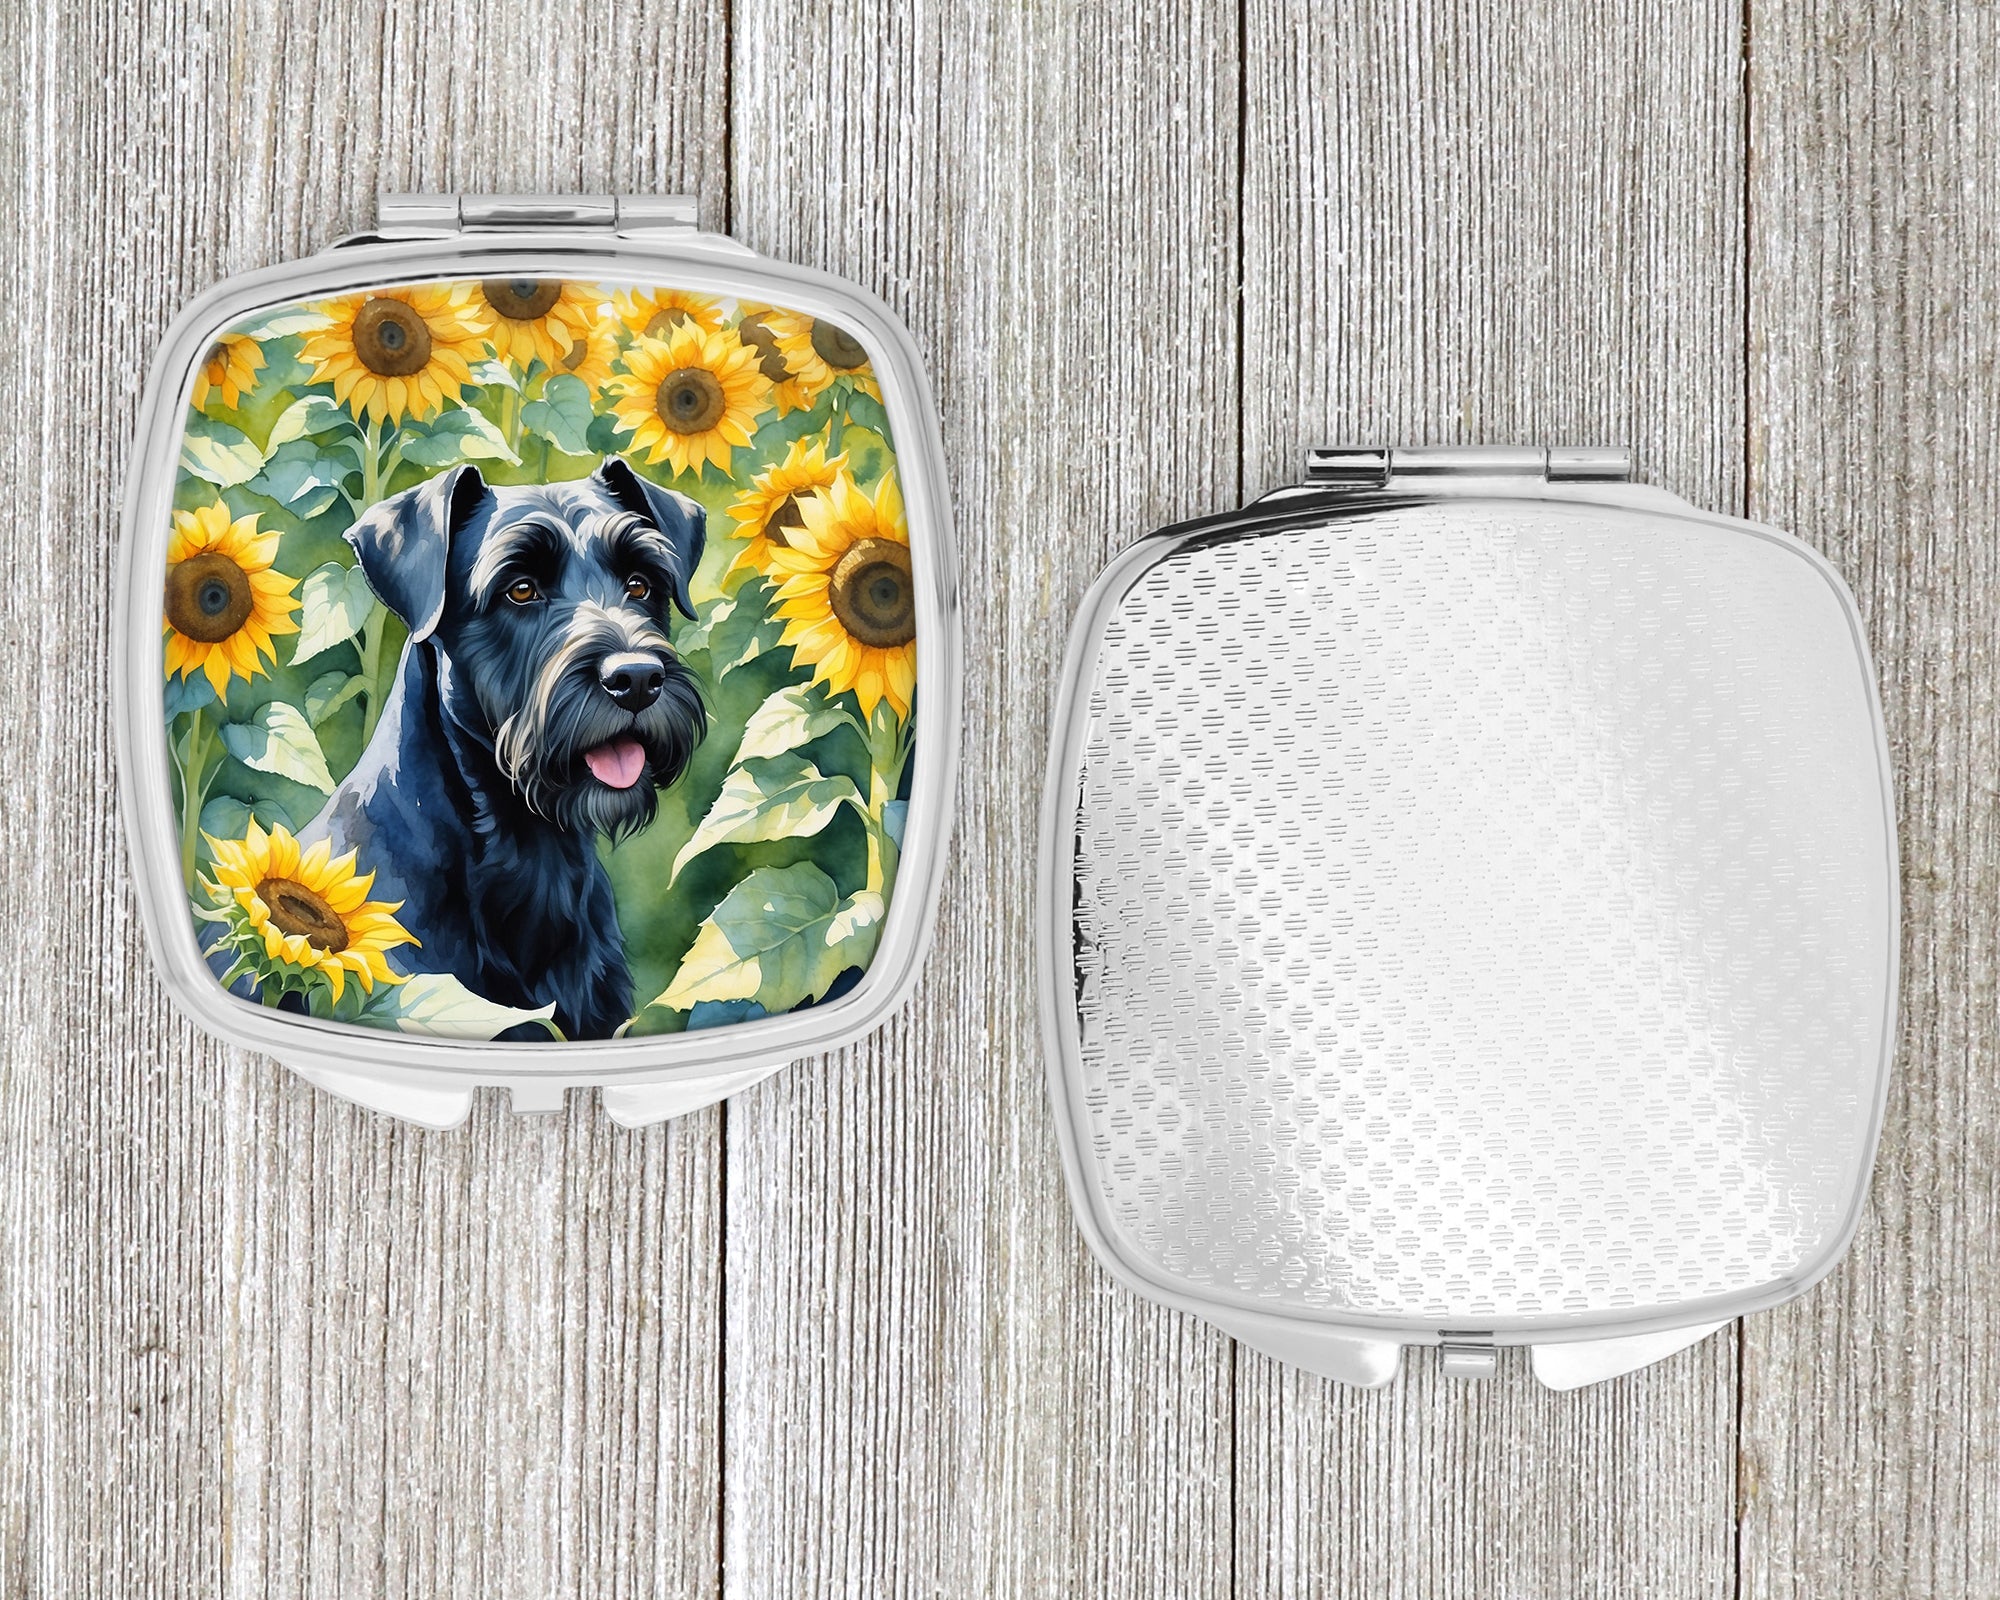 Giant Schnauzer in Sunflowers Compact Mirror